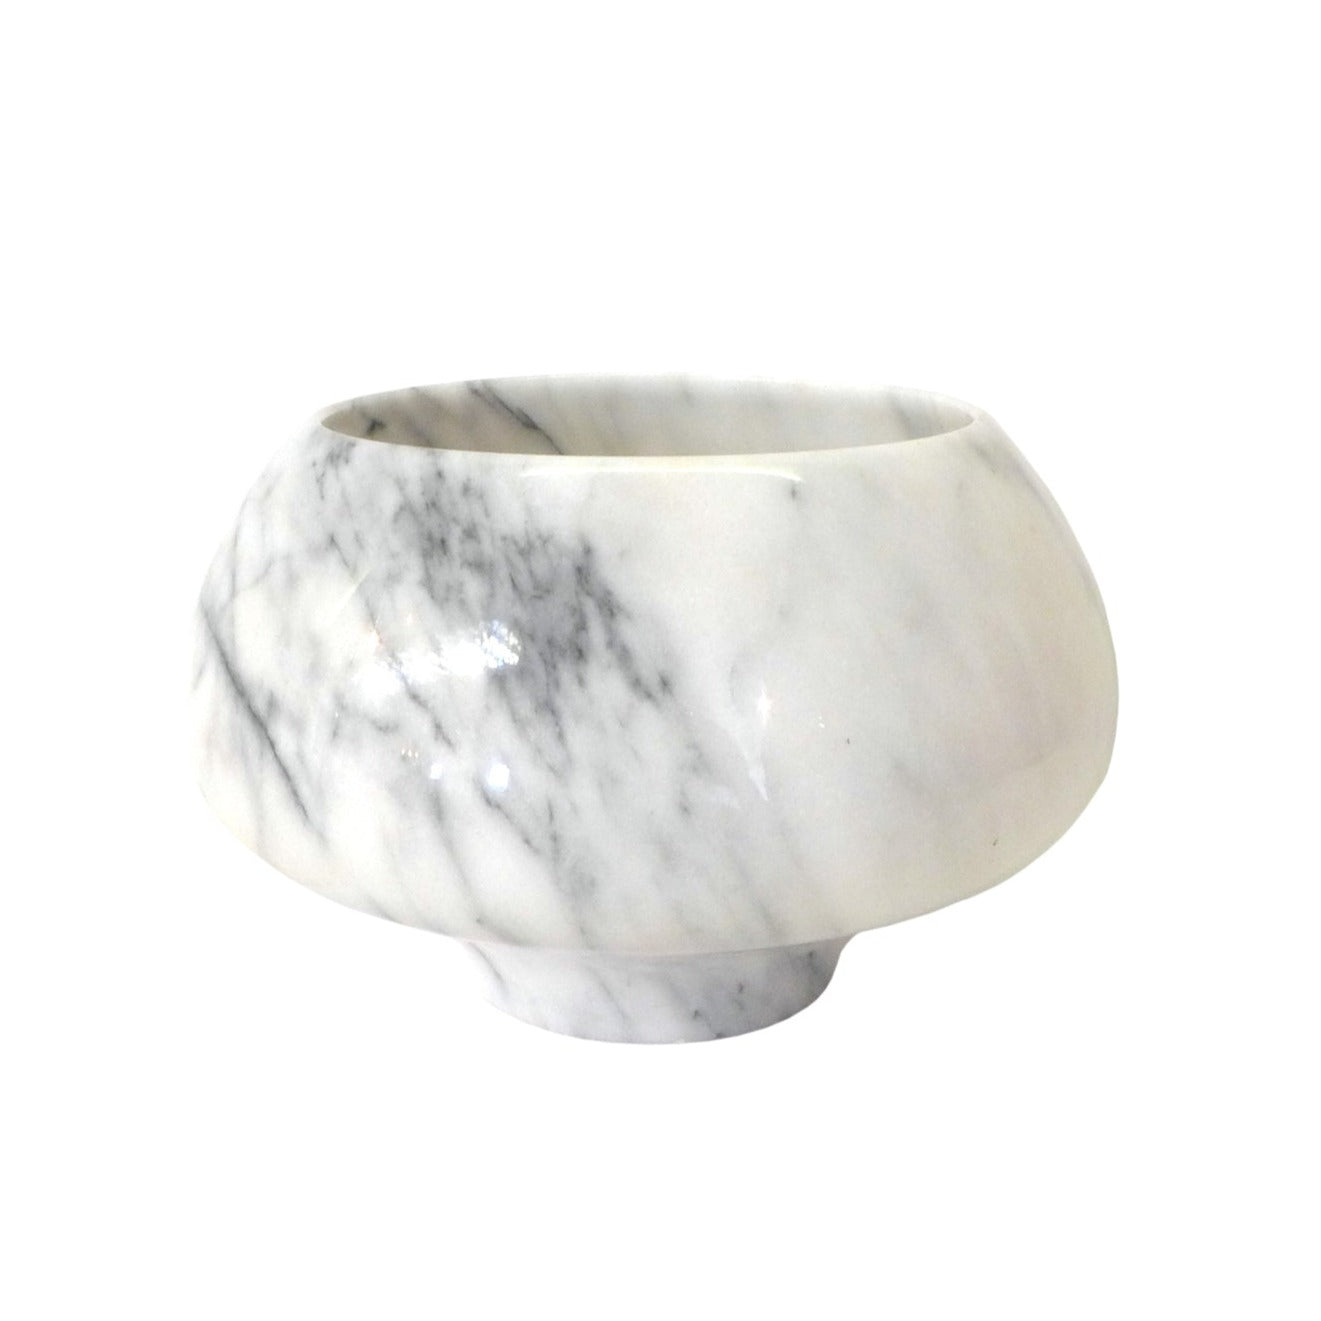 Turned Carrara Marble Bowl or Catch-All